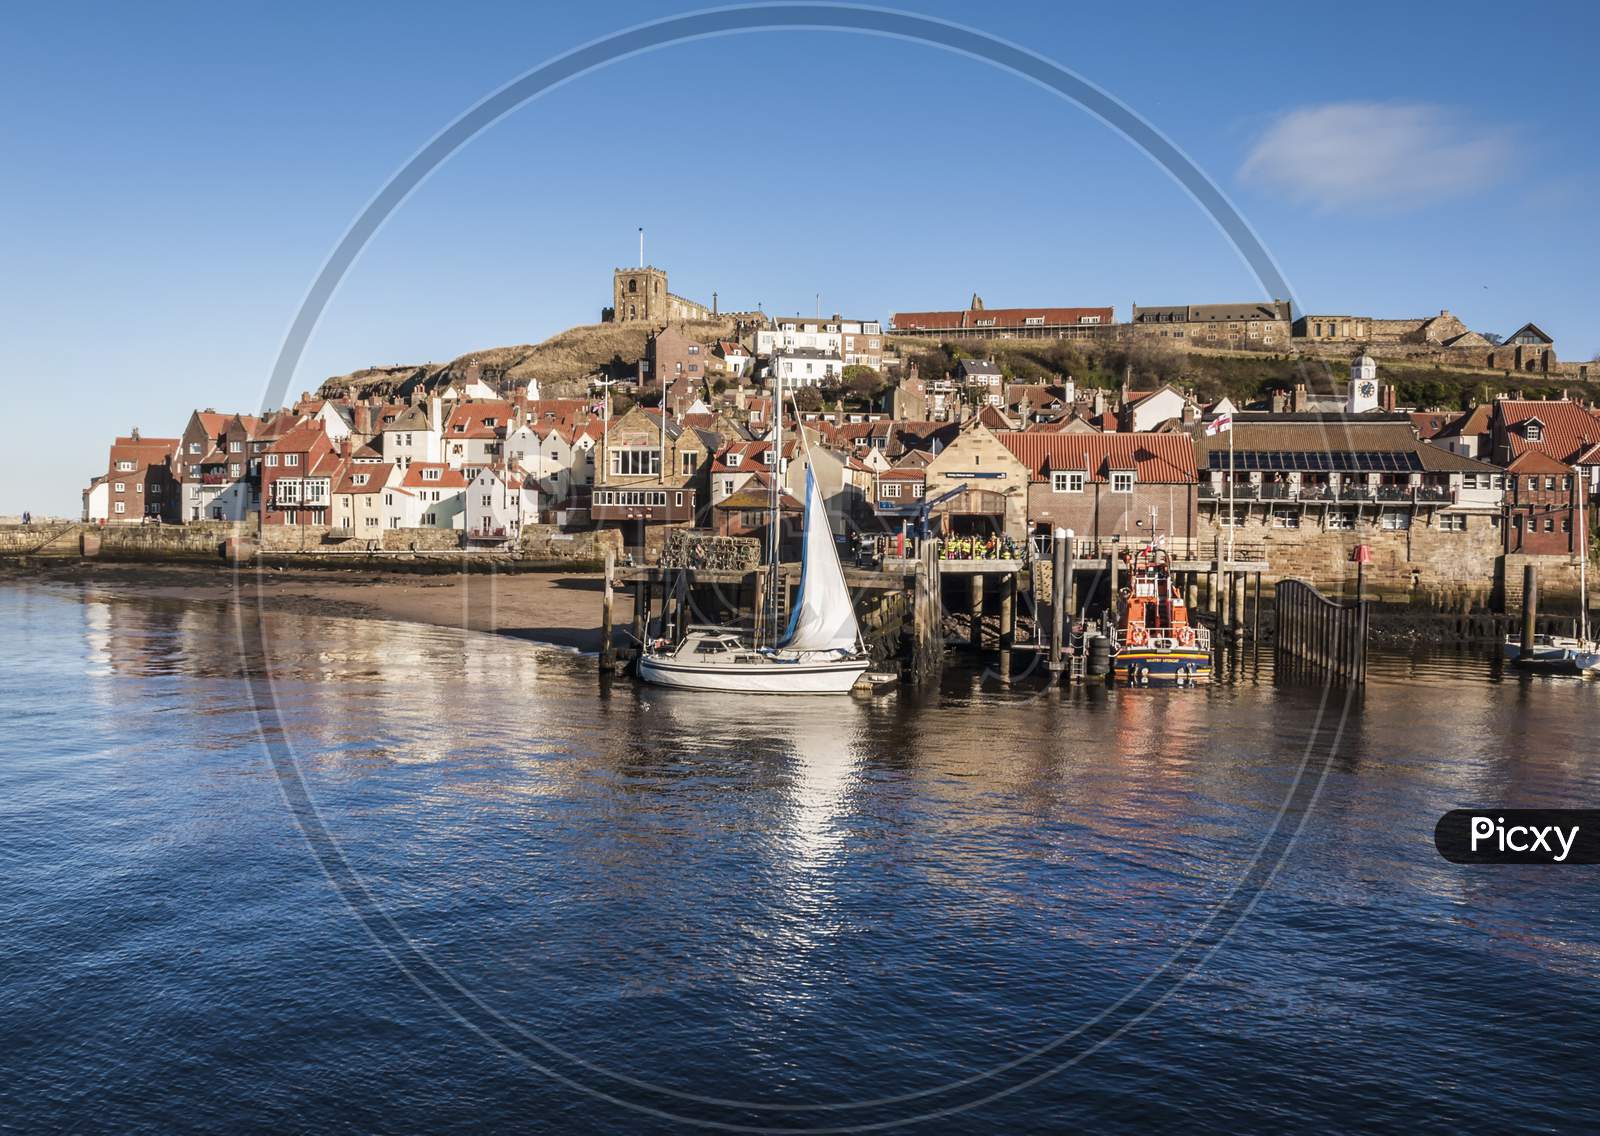 With a boat moored by the side of Whitby’s life boat.